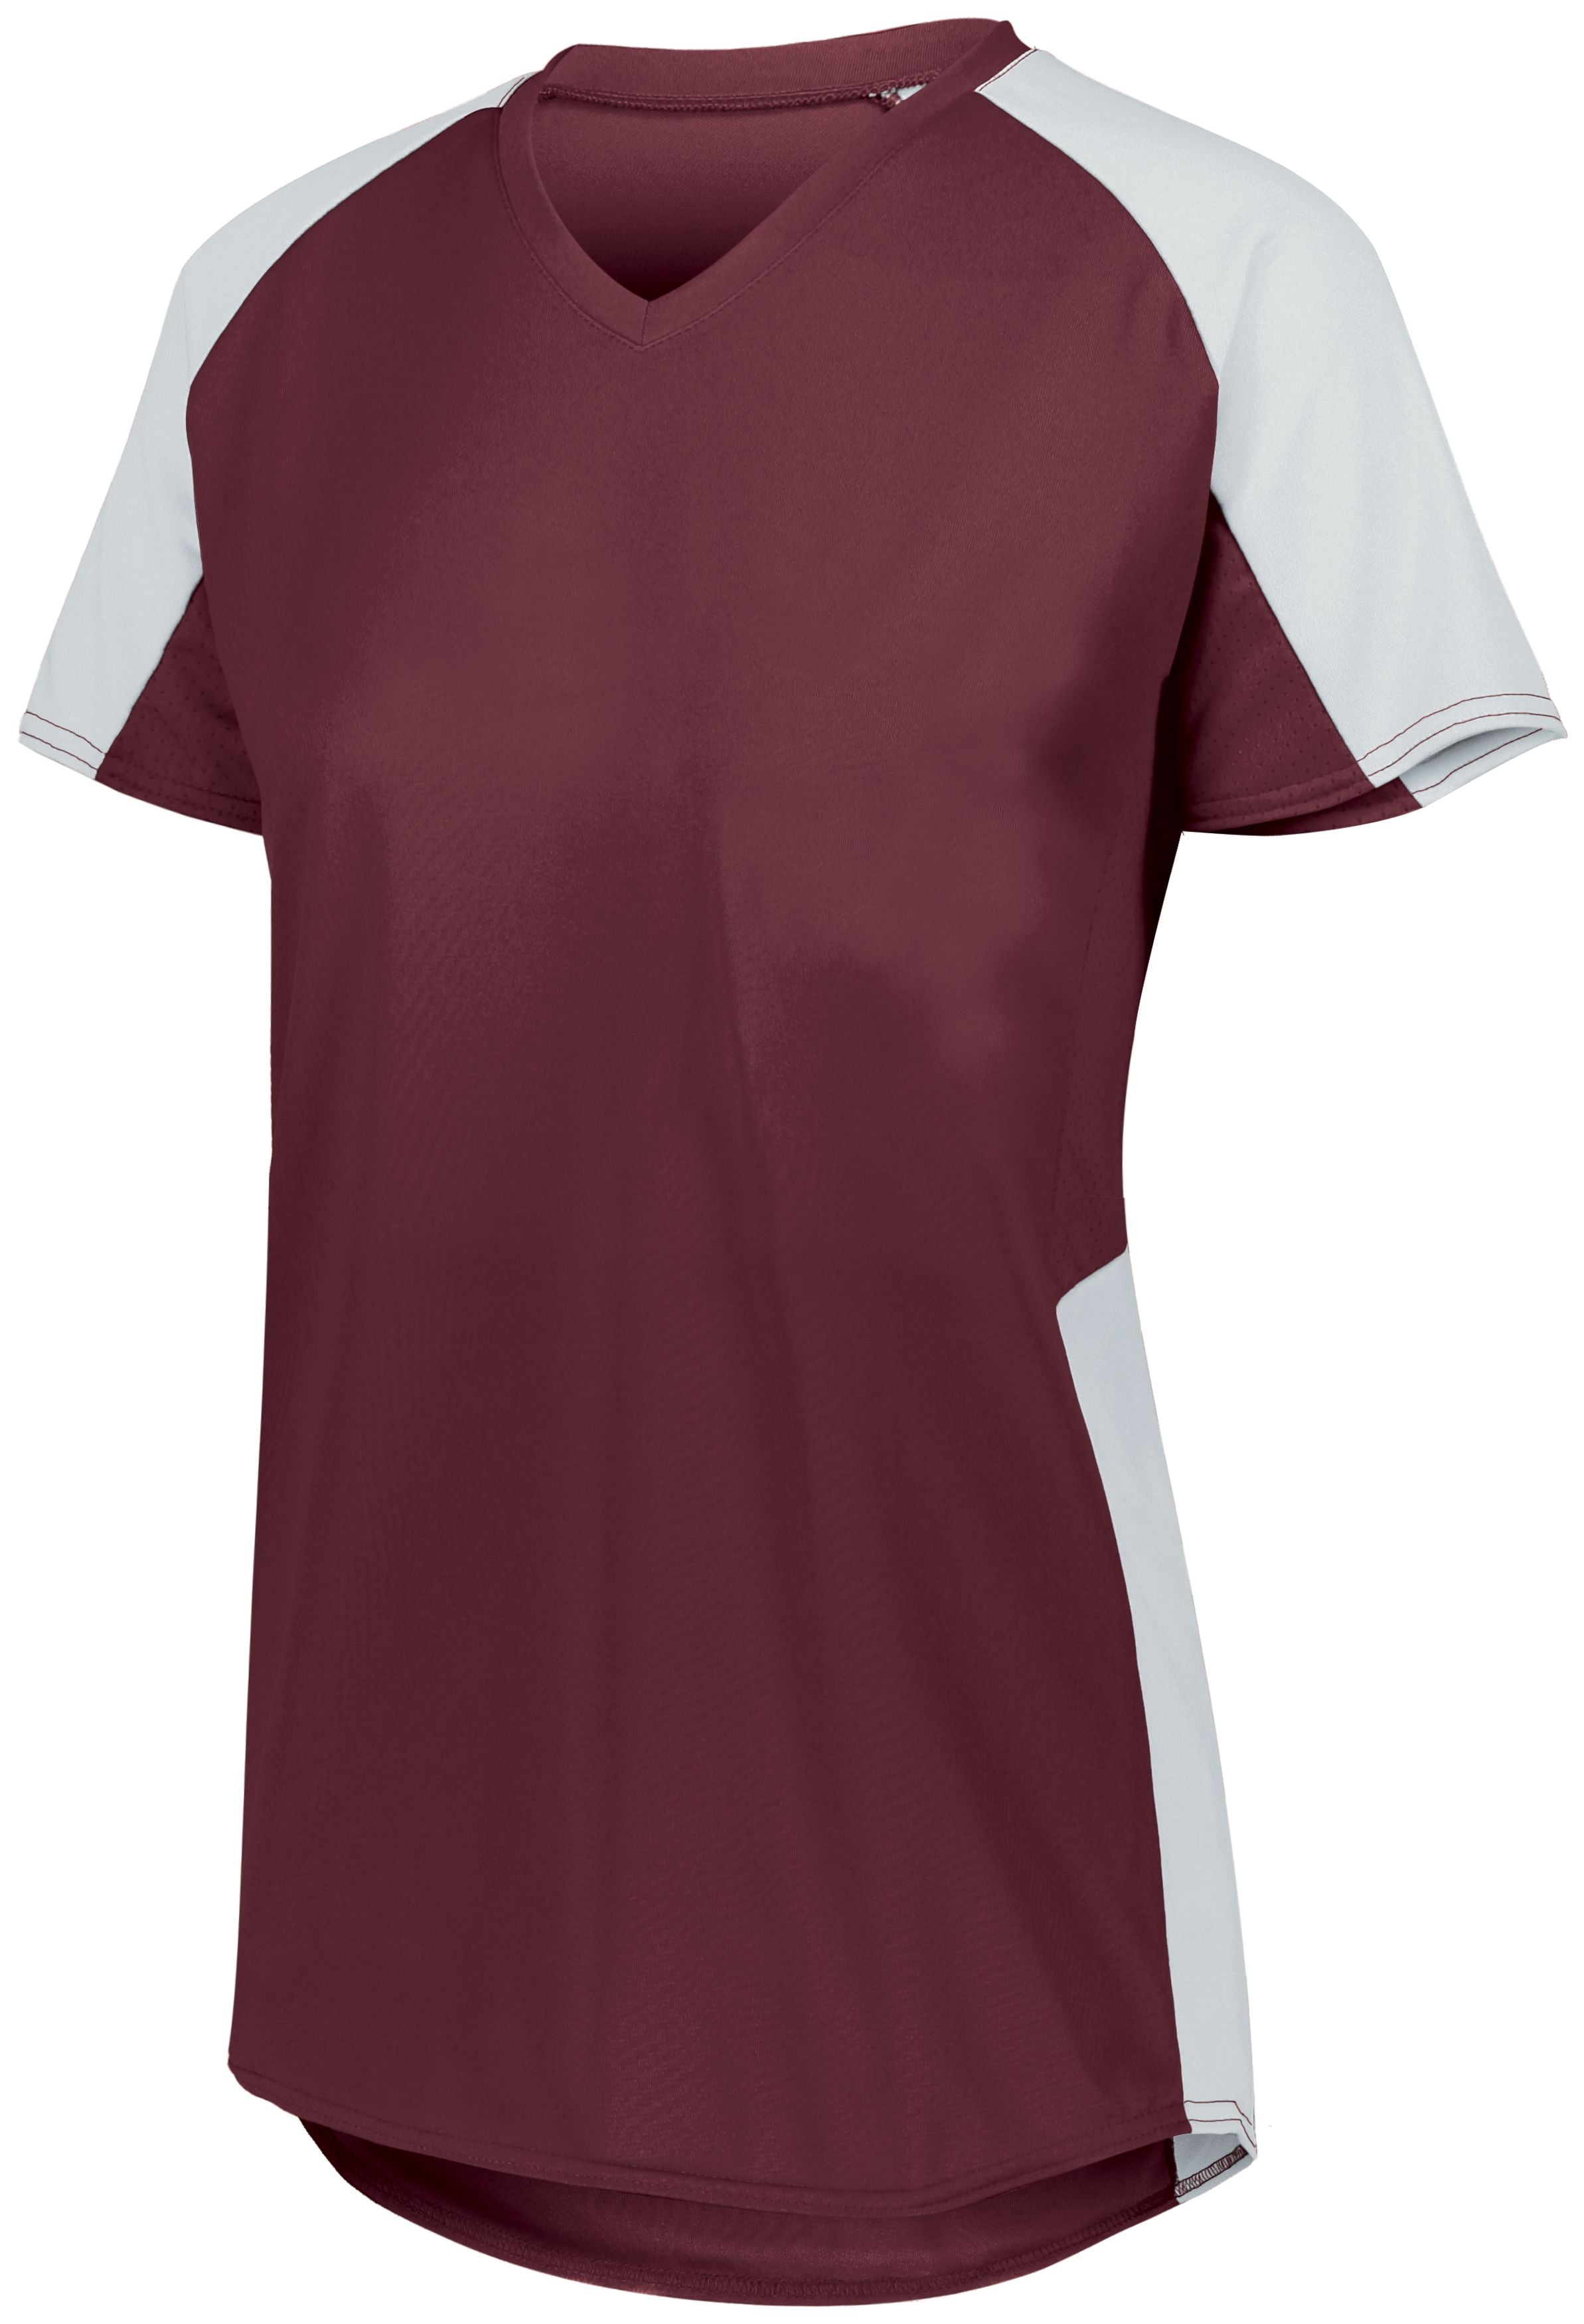 Augusta Sportswear Ladies Cutter Jersey in Maroon/White  -Part of the Ladies, Ladies-Jersey, Augusta-Products, Softball, Shirts product lines at KanaleyCreations.com